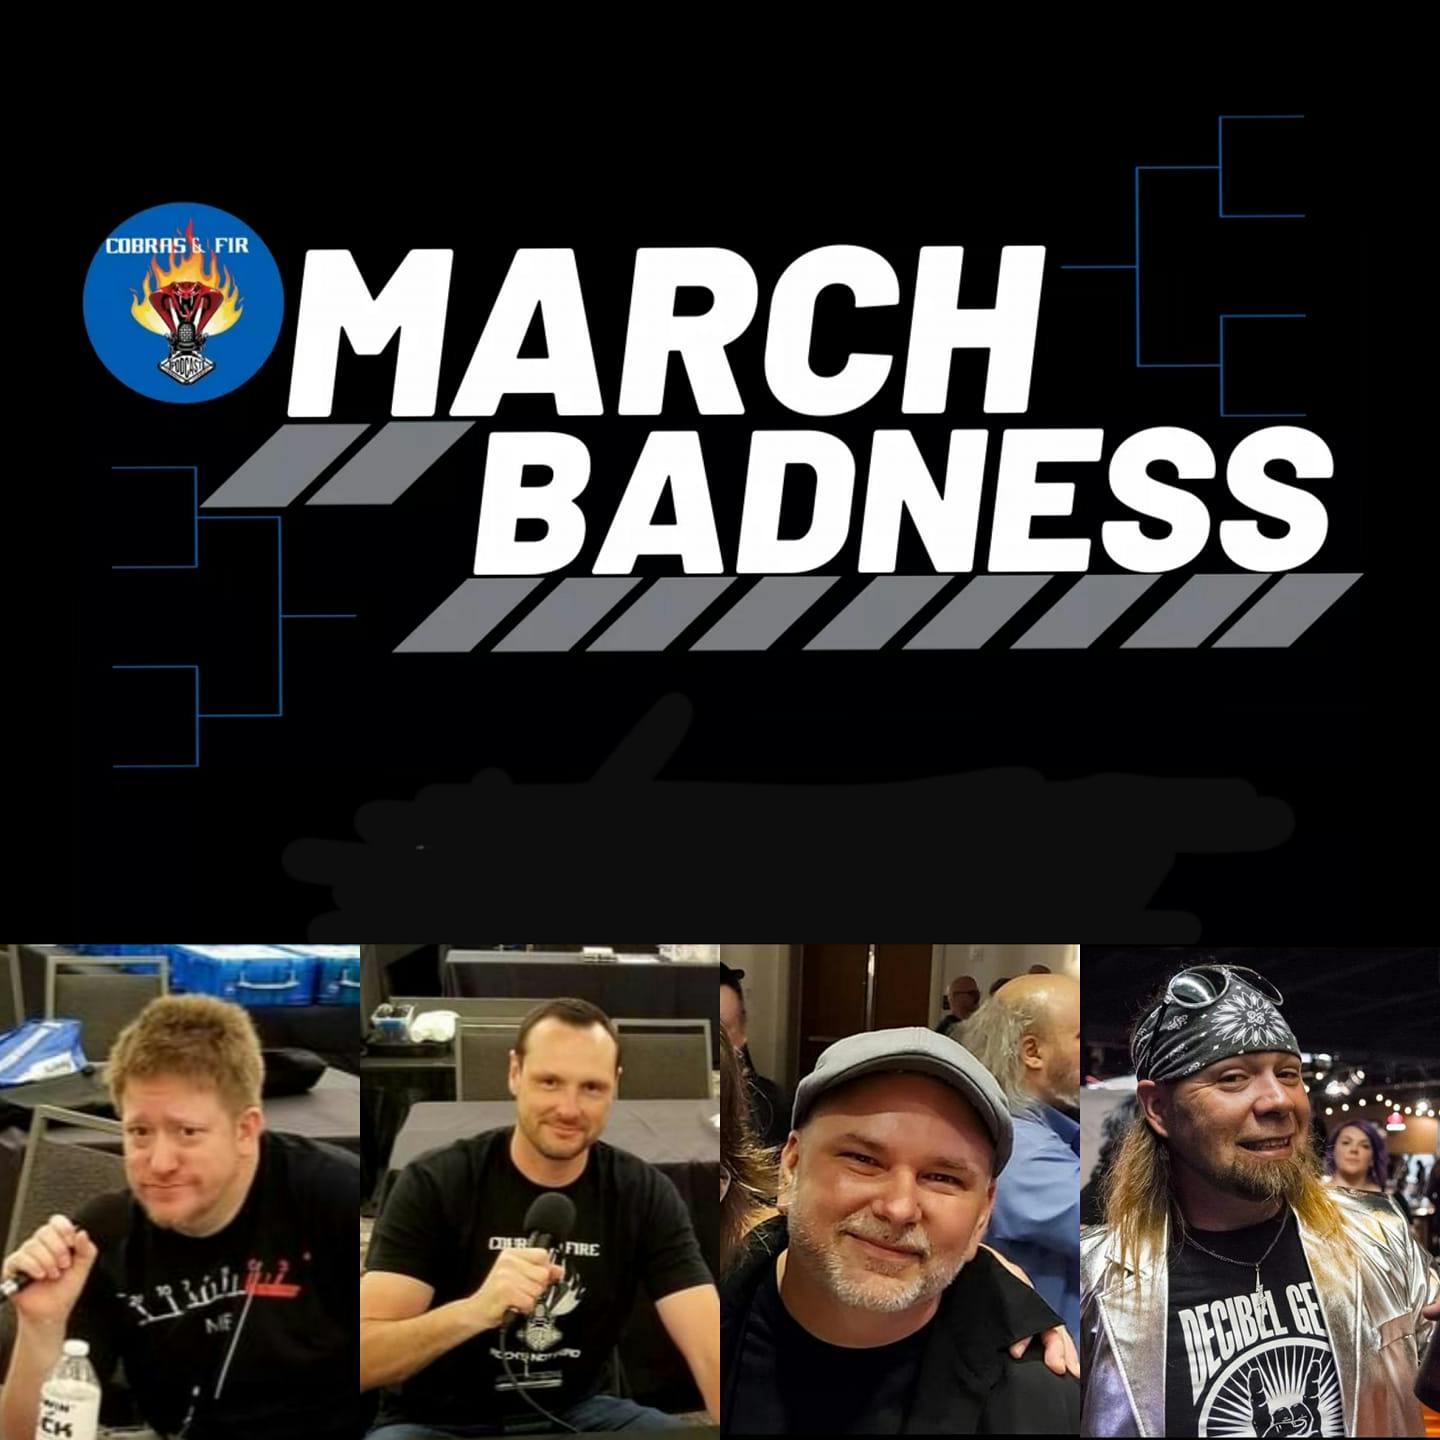 Cobras & Fire Podcast: March Badness Round One Results Show